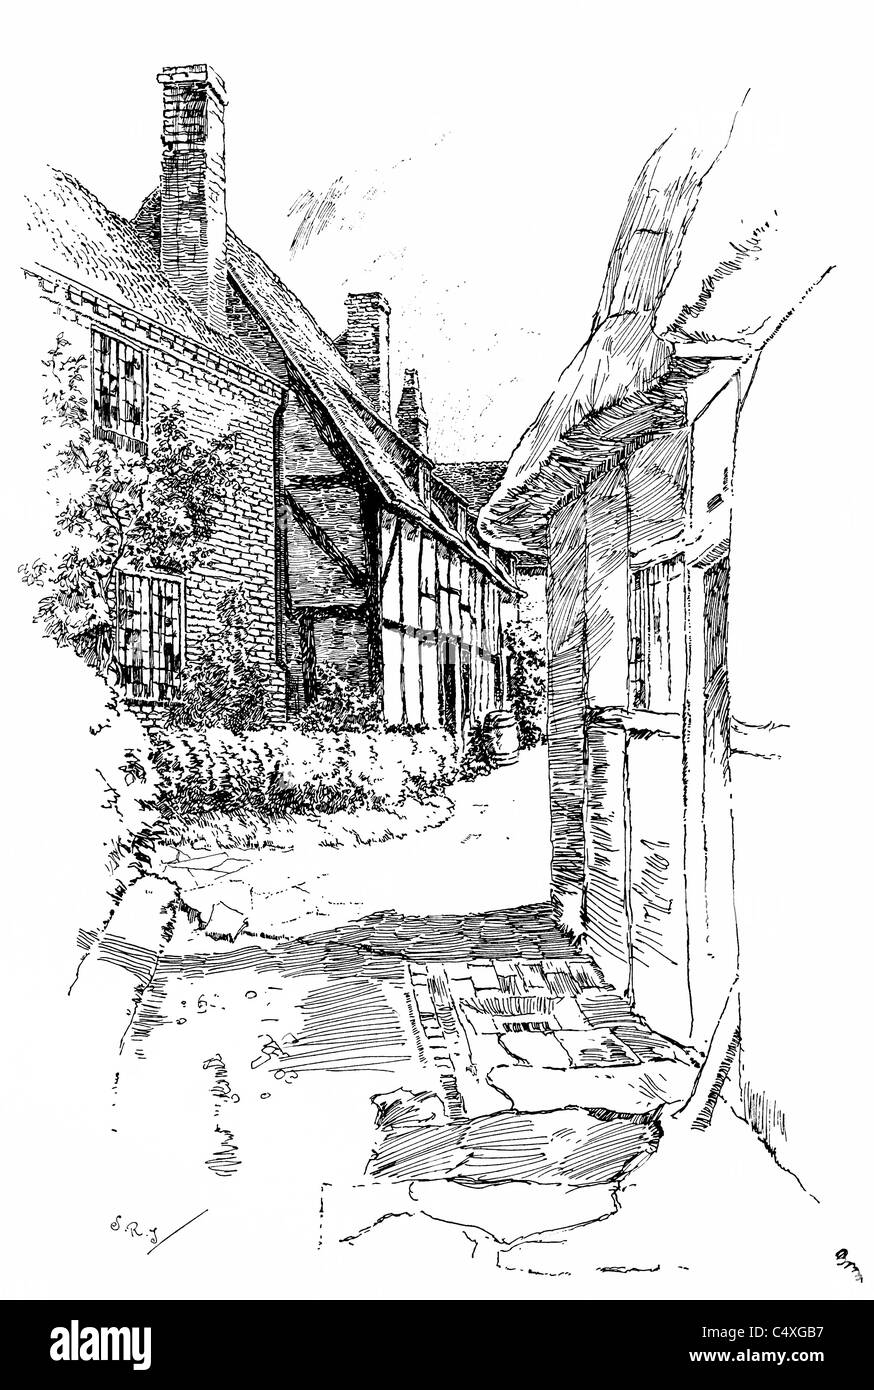 Shottery, Warwickshire - pen and ink illustration from 'Old English Country Cottages' by Charles Holme, 1906. Stock Photo